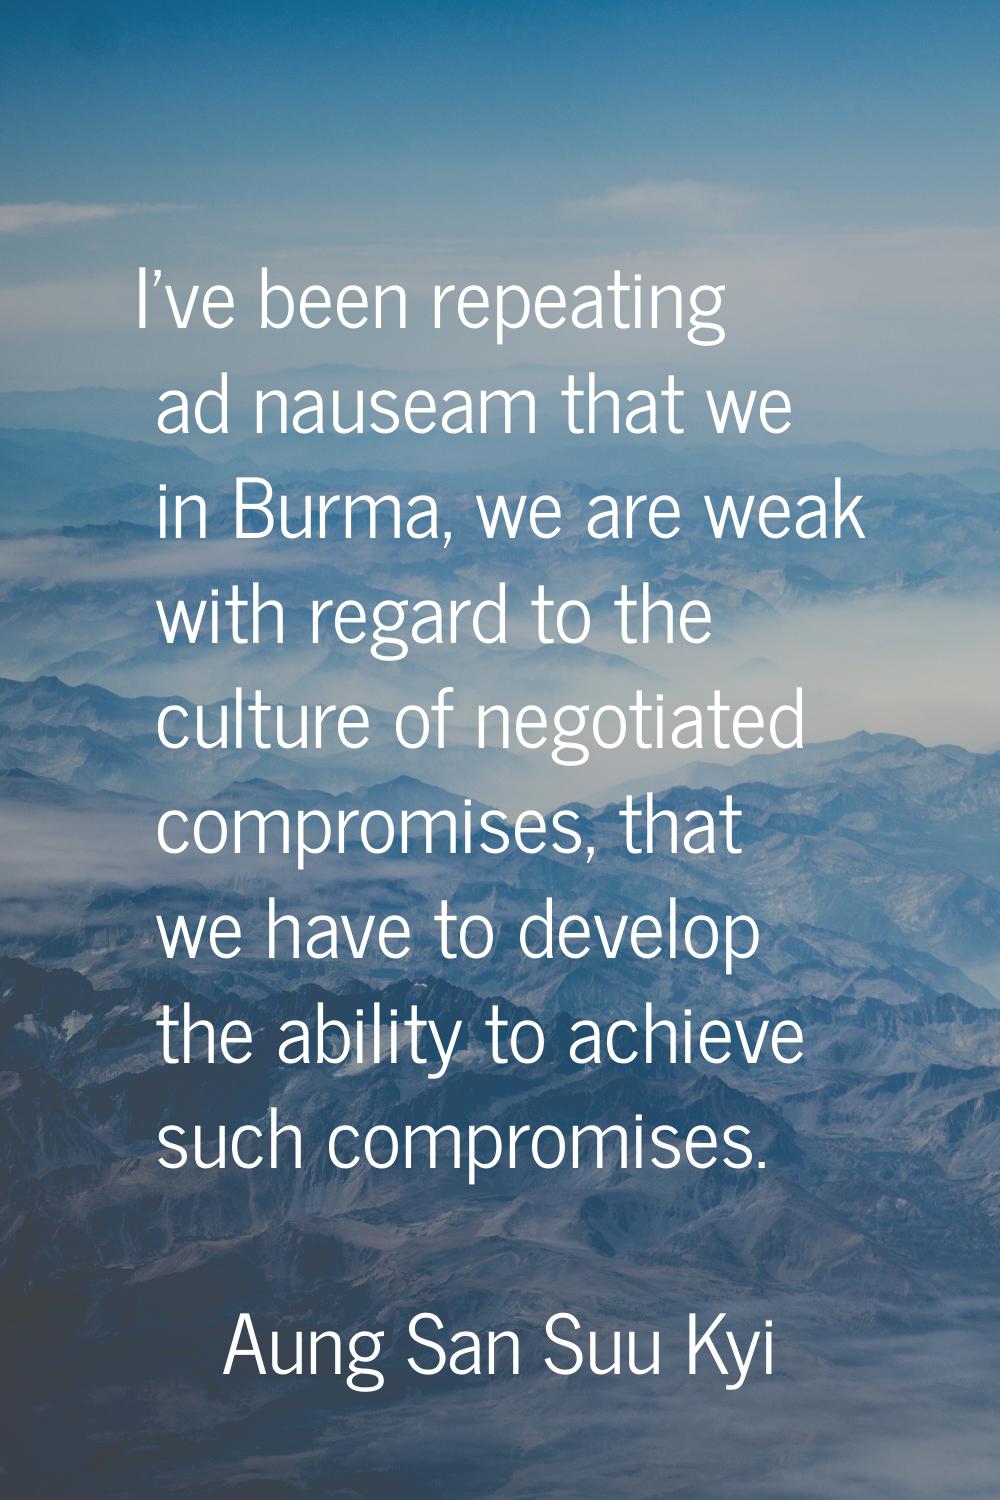 I've been repeating ad nauseam that we in Burma, we are weak with regard to the culture of negotiat